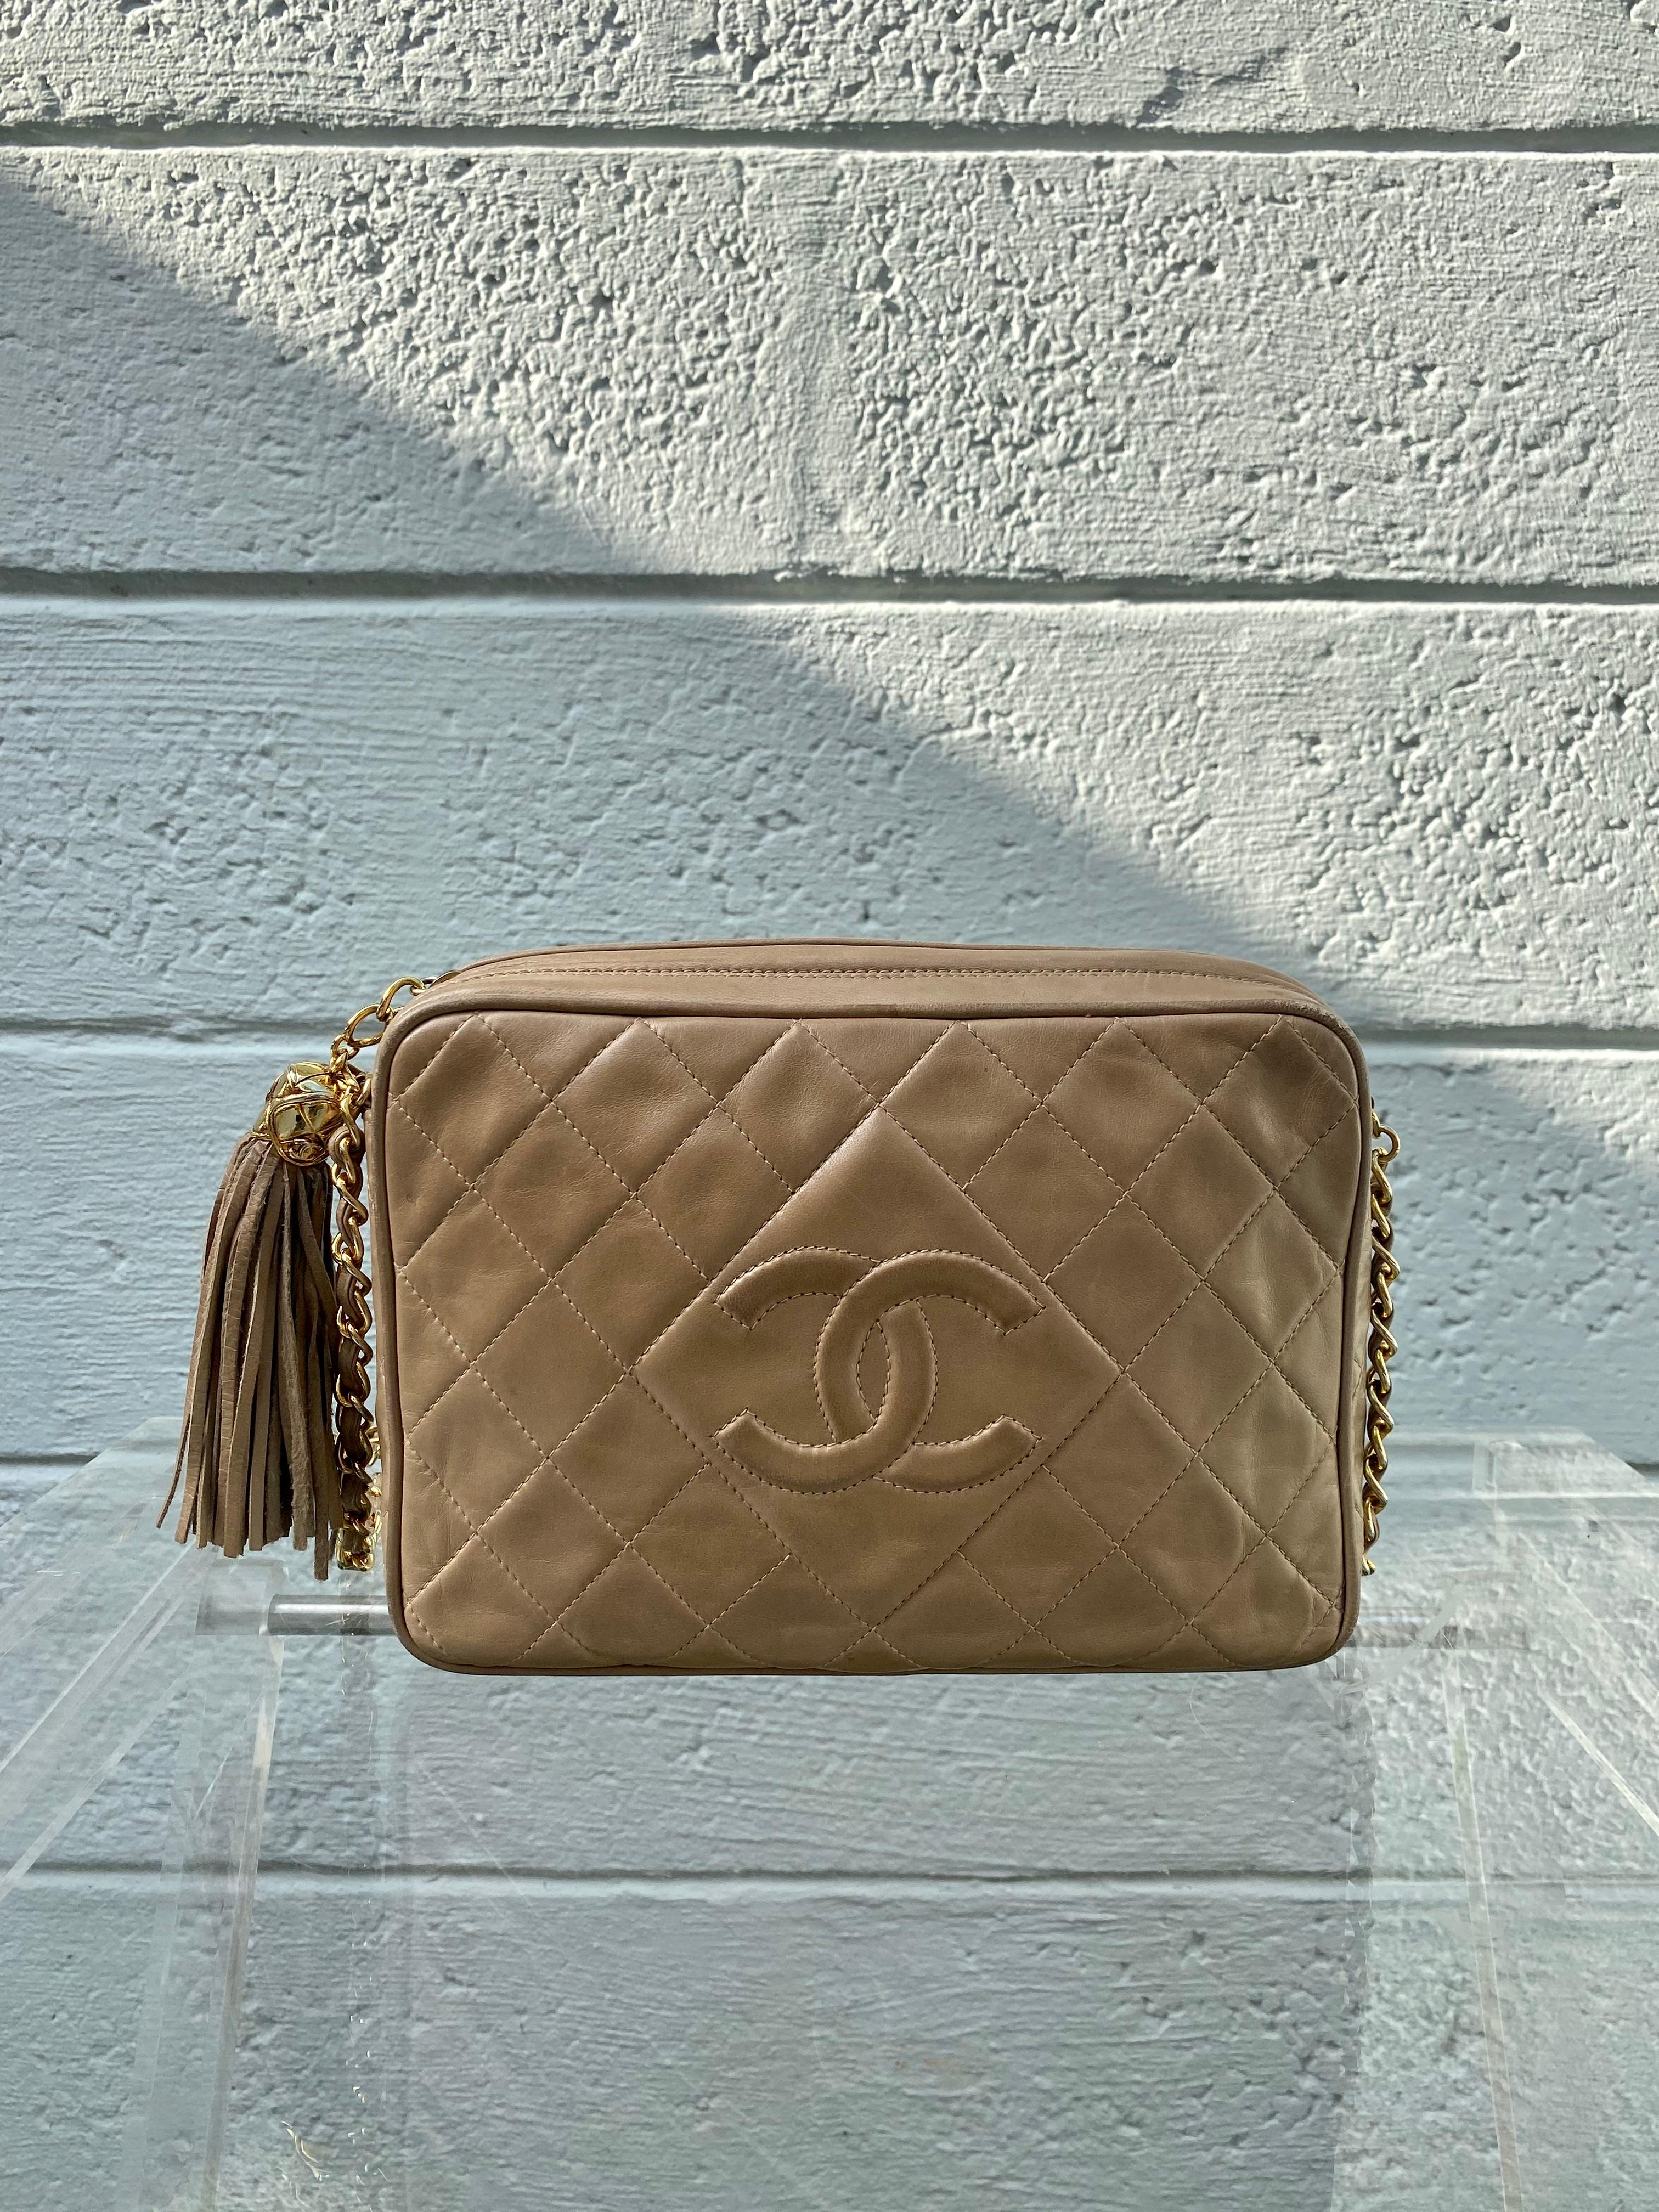 Chanel Vintage Beige Quilted Lambskin Camera Crossbody Bag For Sale 3